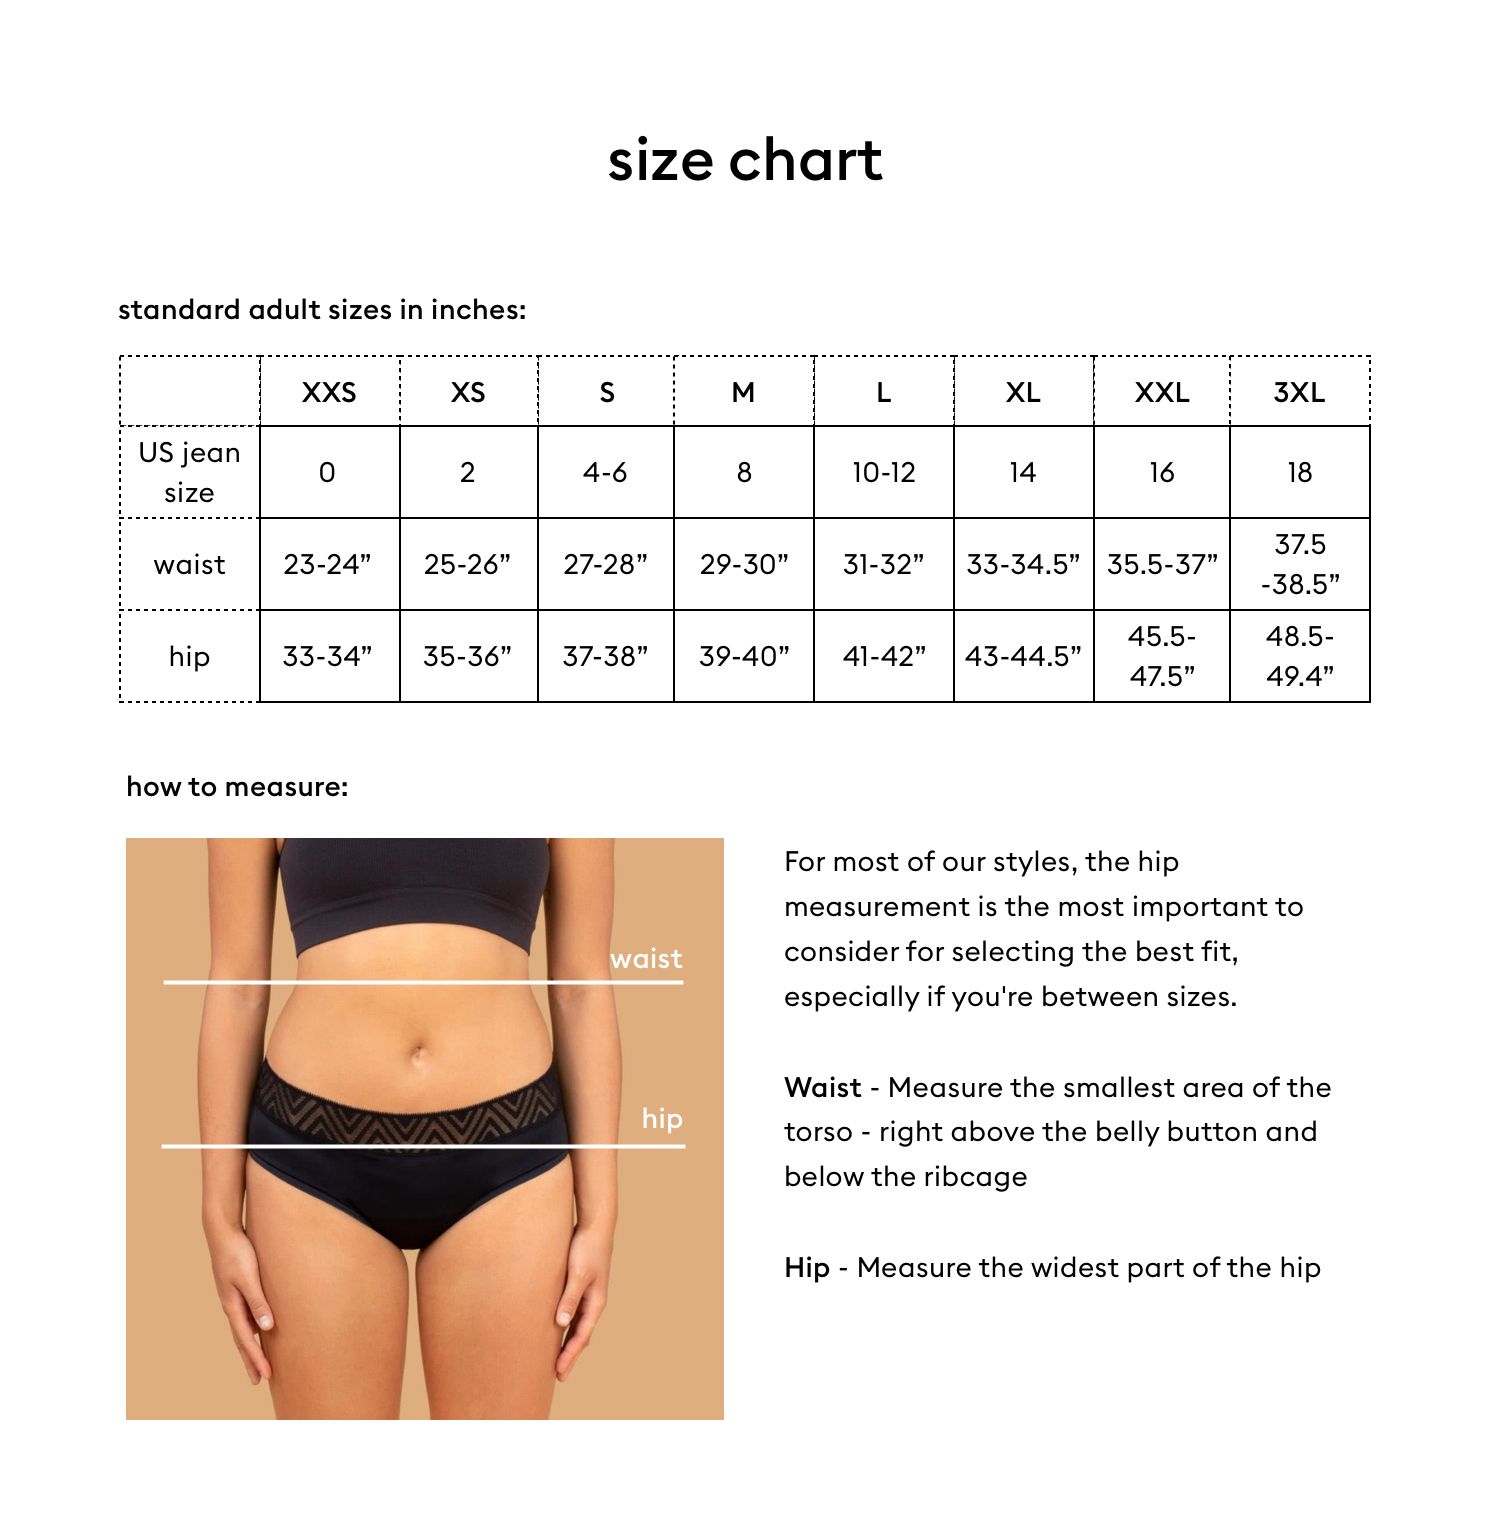 Thinx for All Women's Super Absorbency Cotton Brief Period